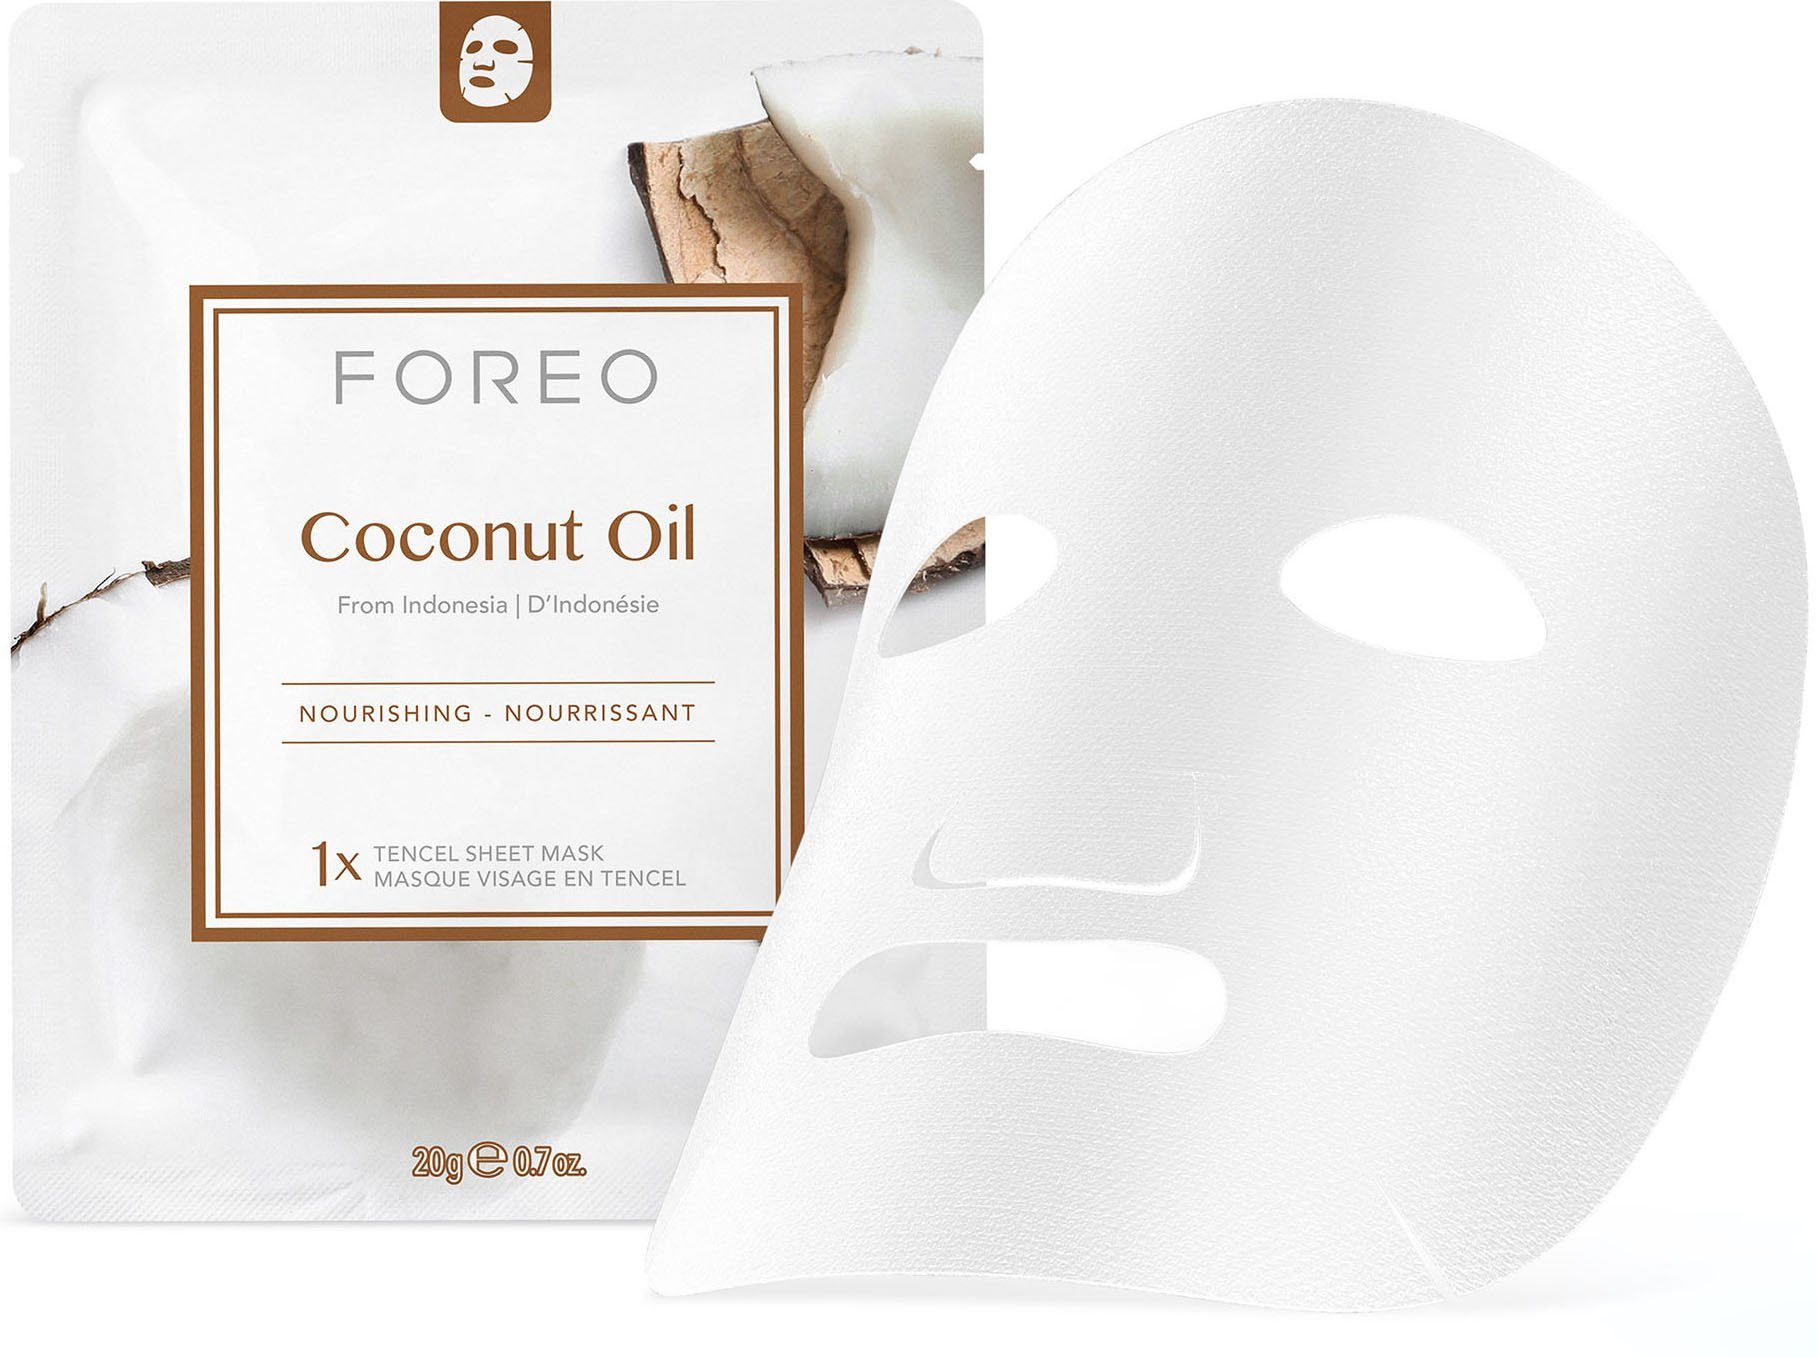 Collection Face Sheet To FOREO Farm Gesichtsmaske Masks Oil Coconut